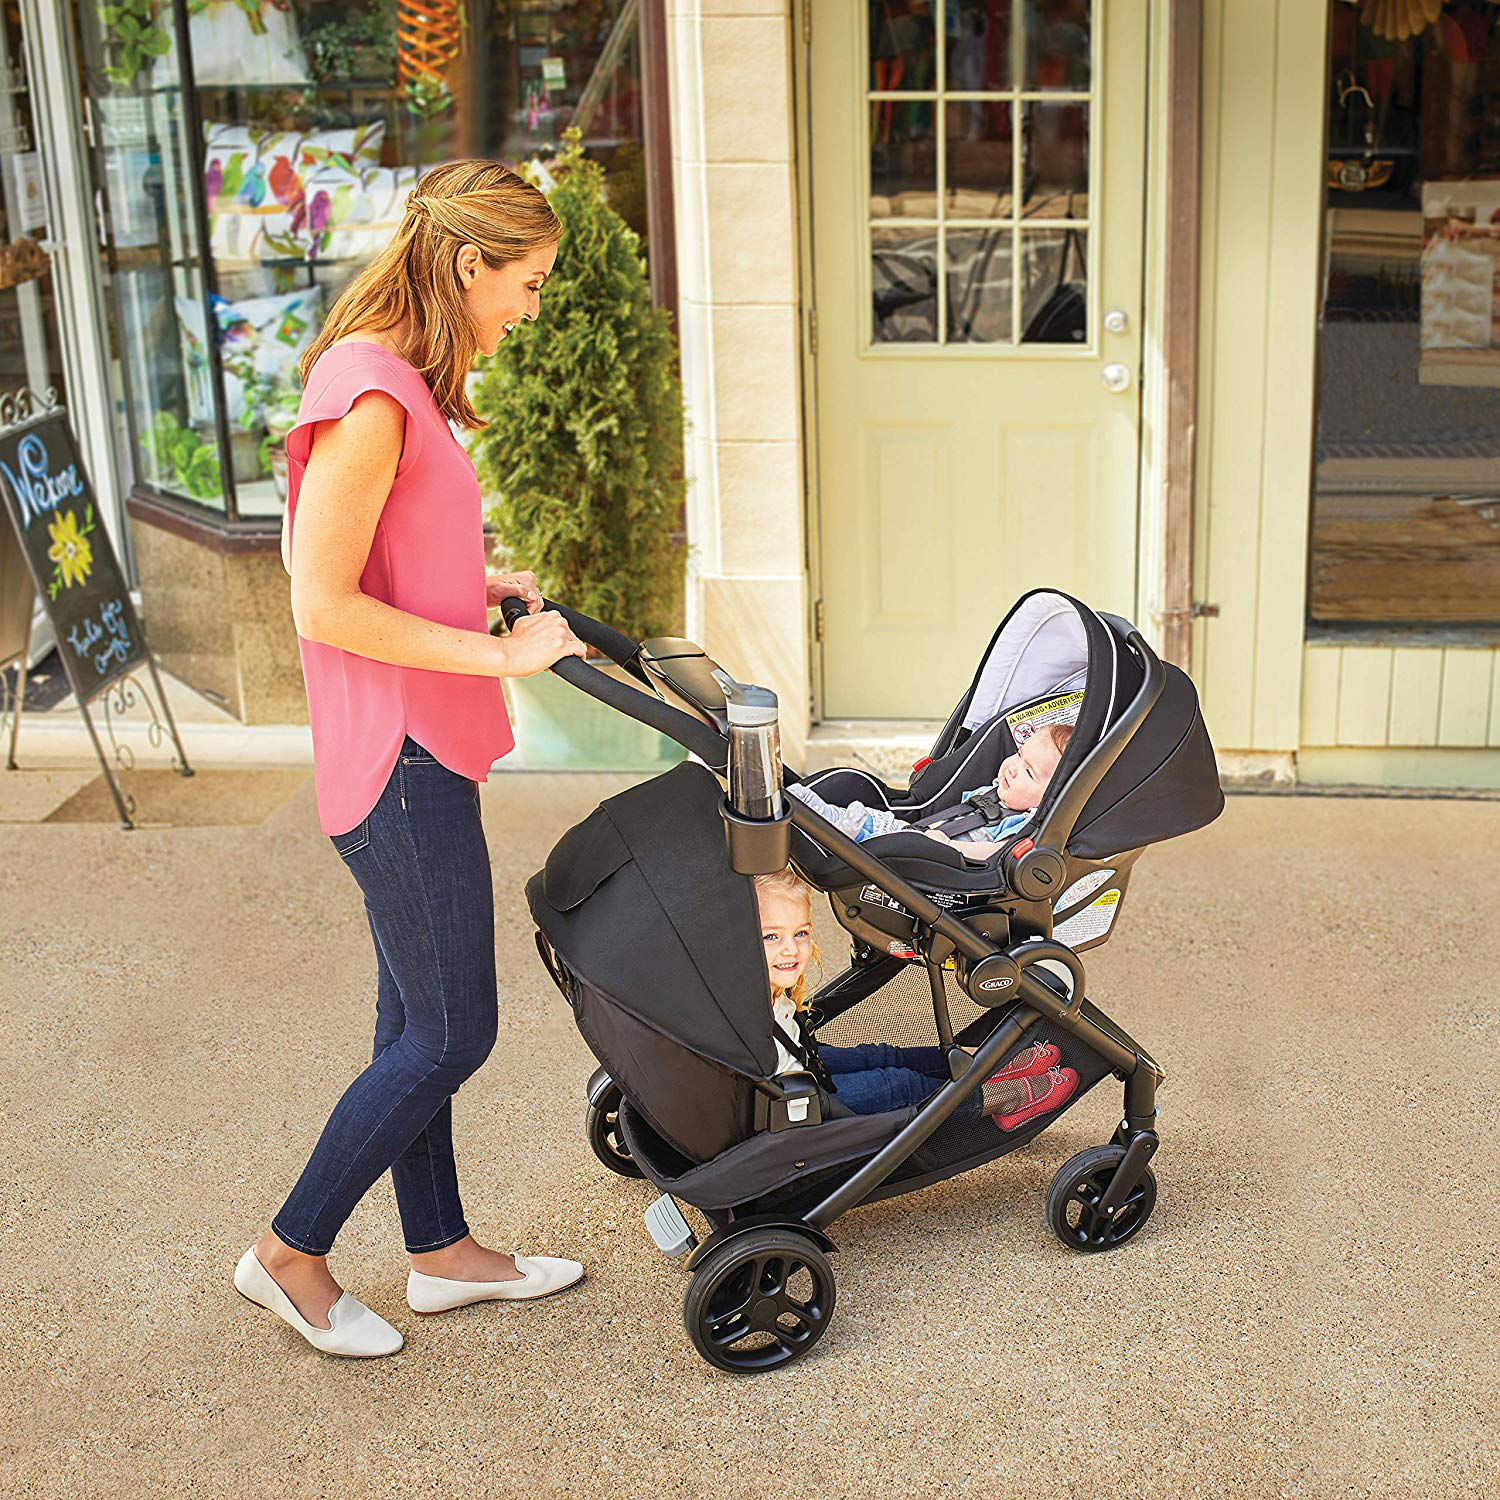 Tips for using a Graco stroller with car seat{null}